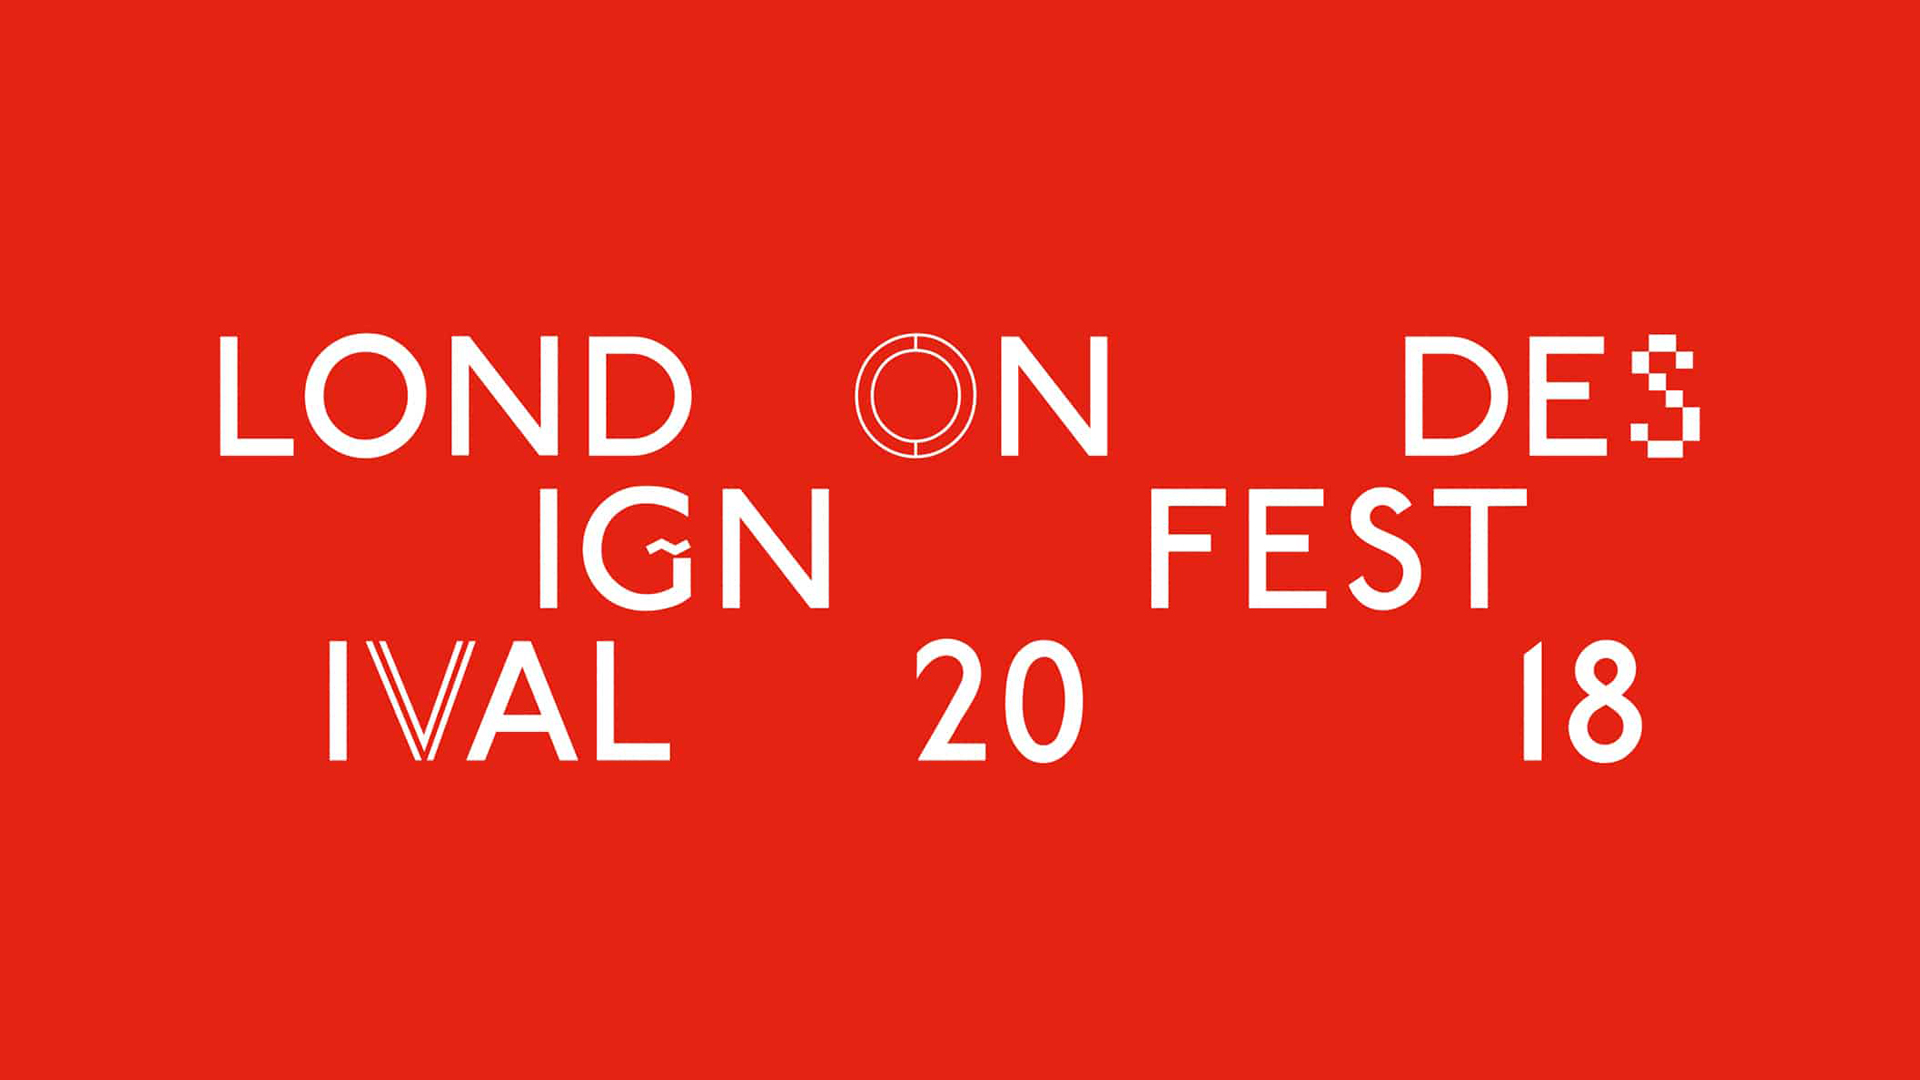 We exhibited at the London Design Festival 2018